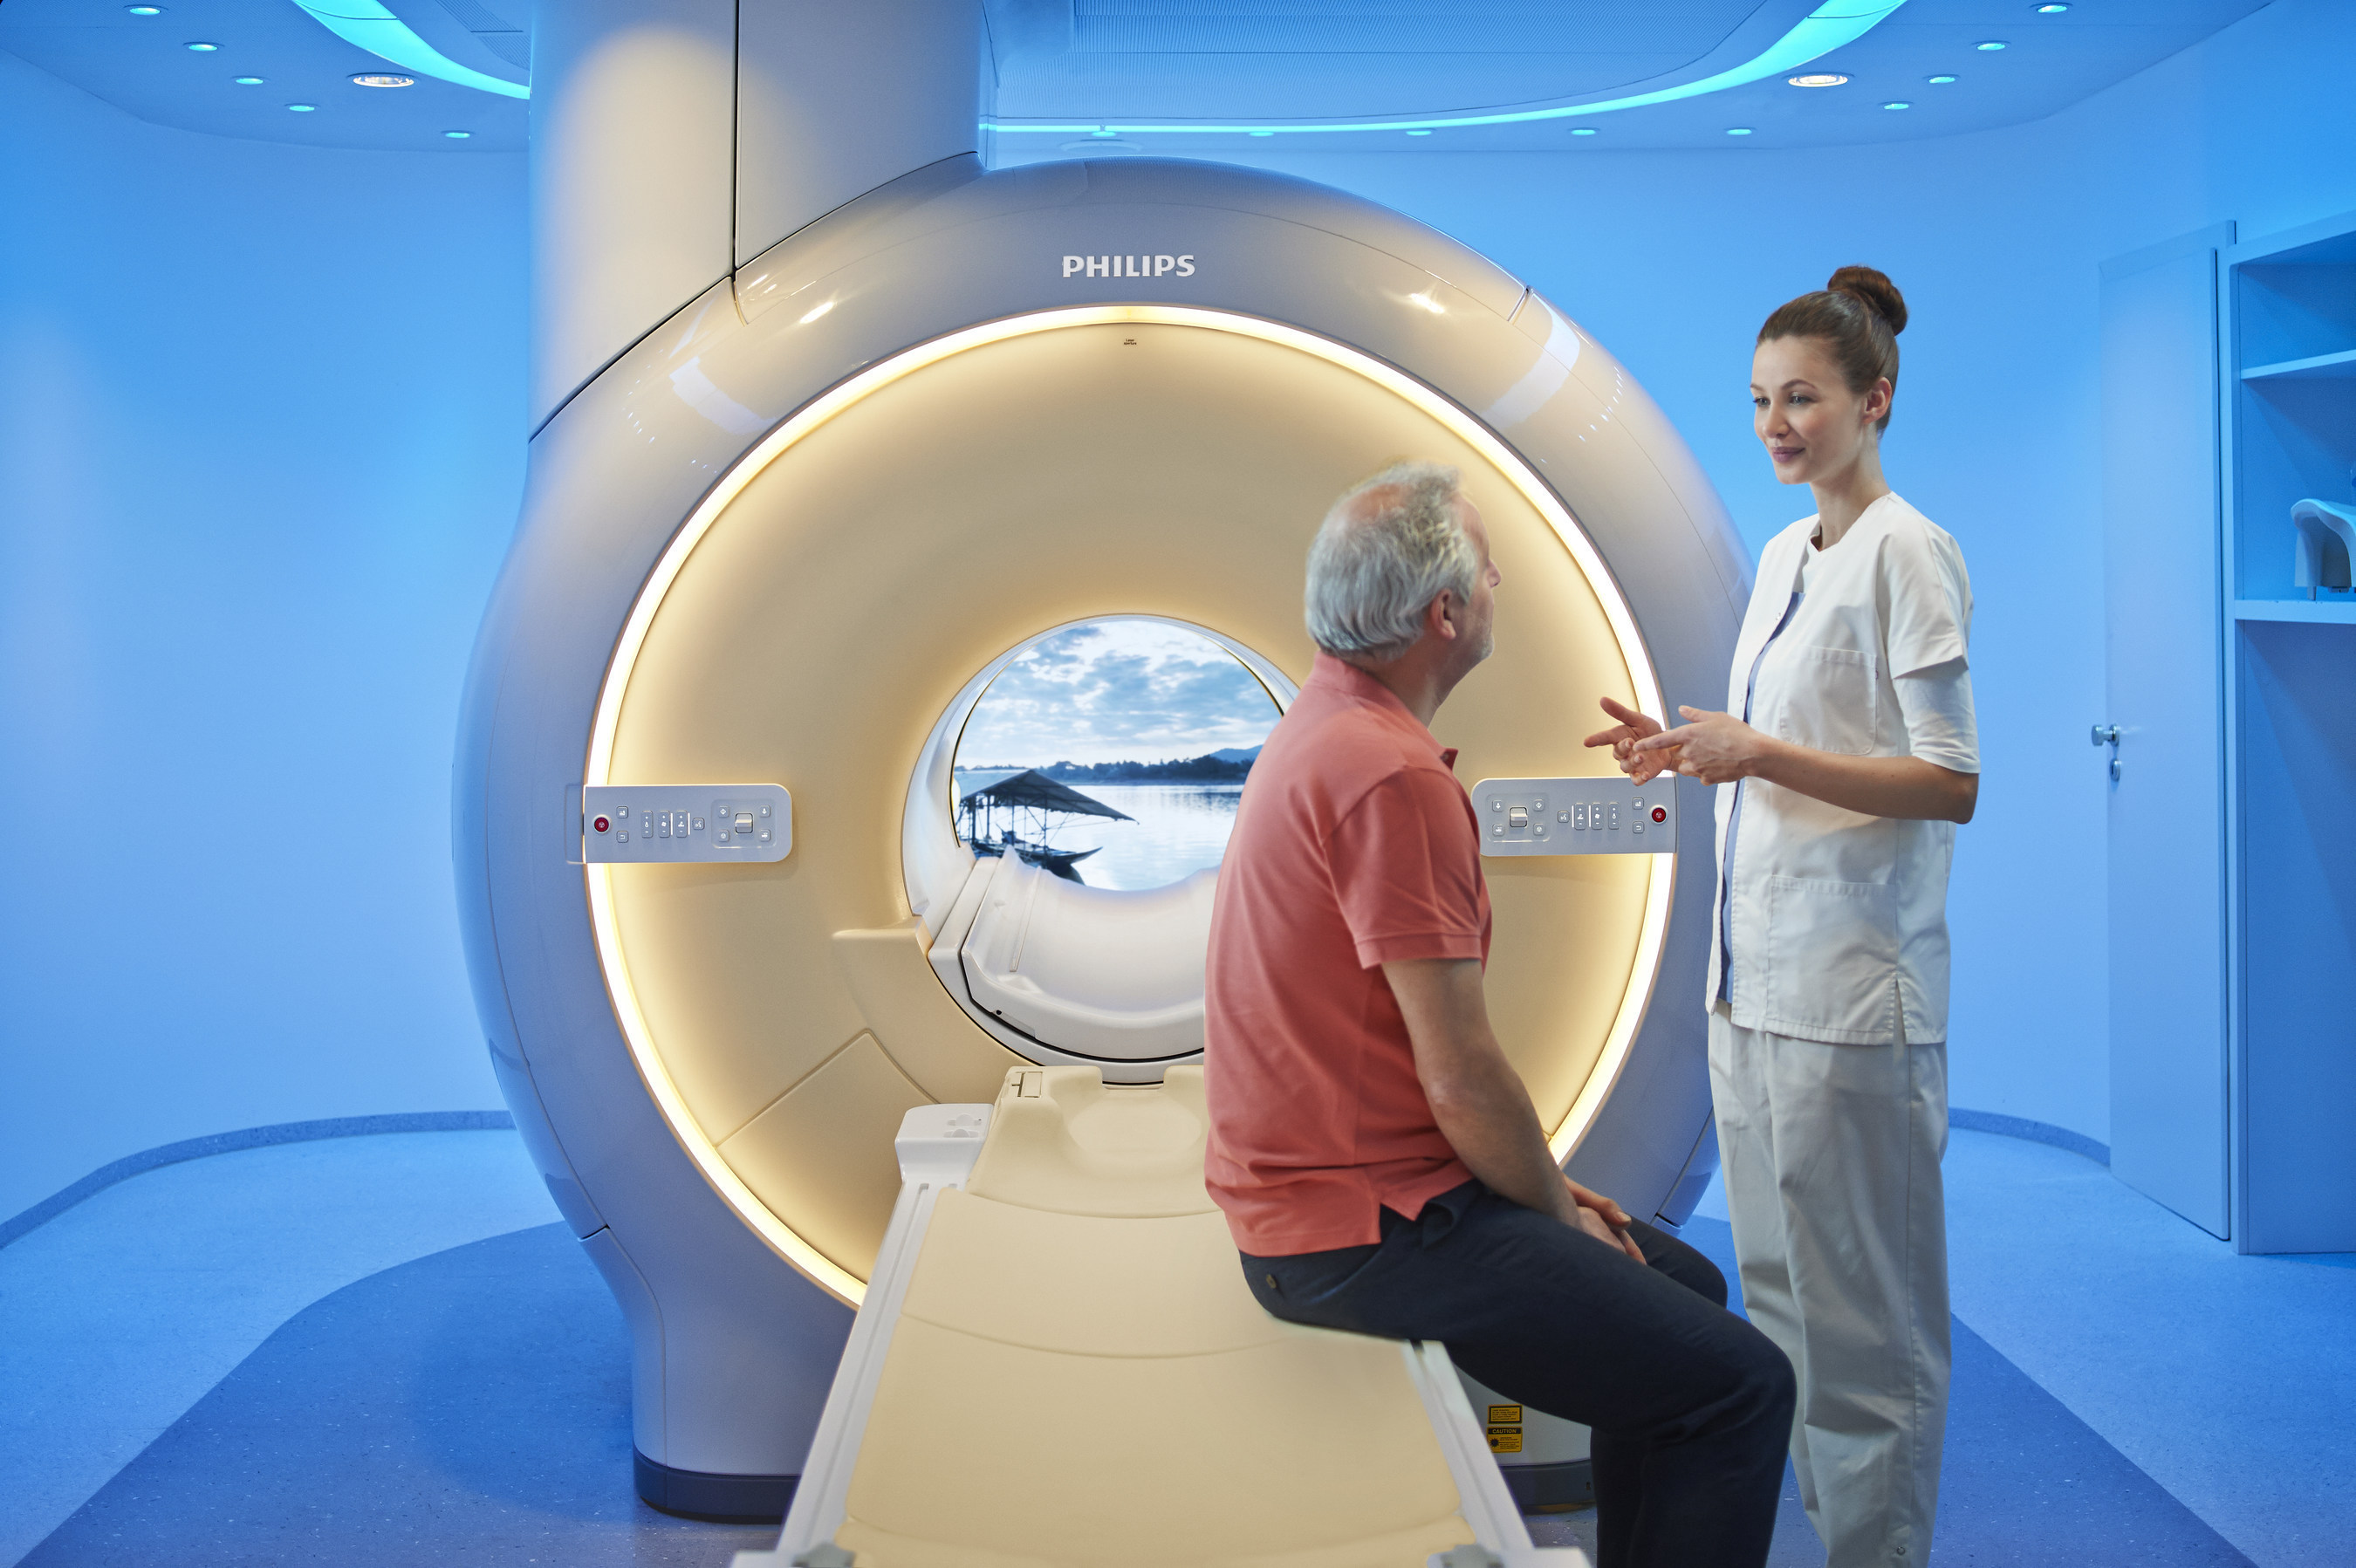 The Ambient Experience for MRI, patient in-bore solution is designed to help patients relax during an MRI exam.